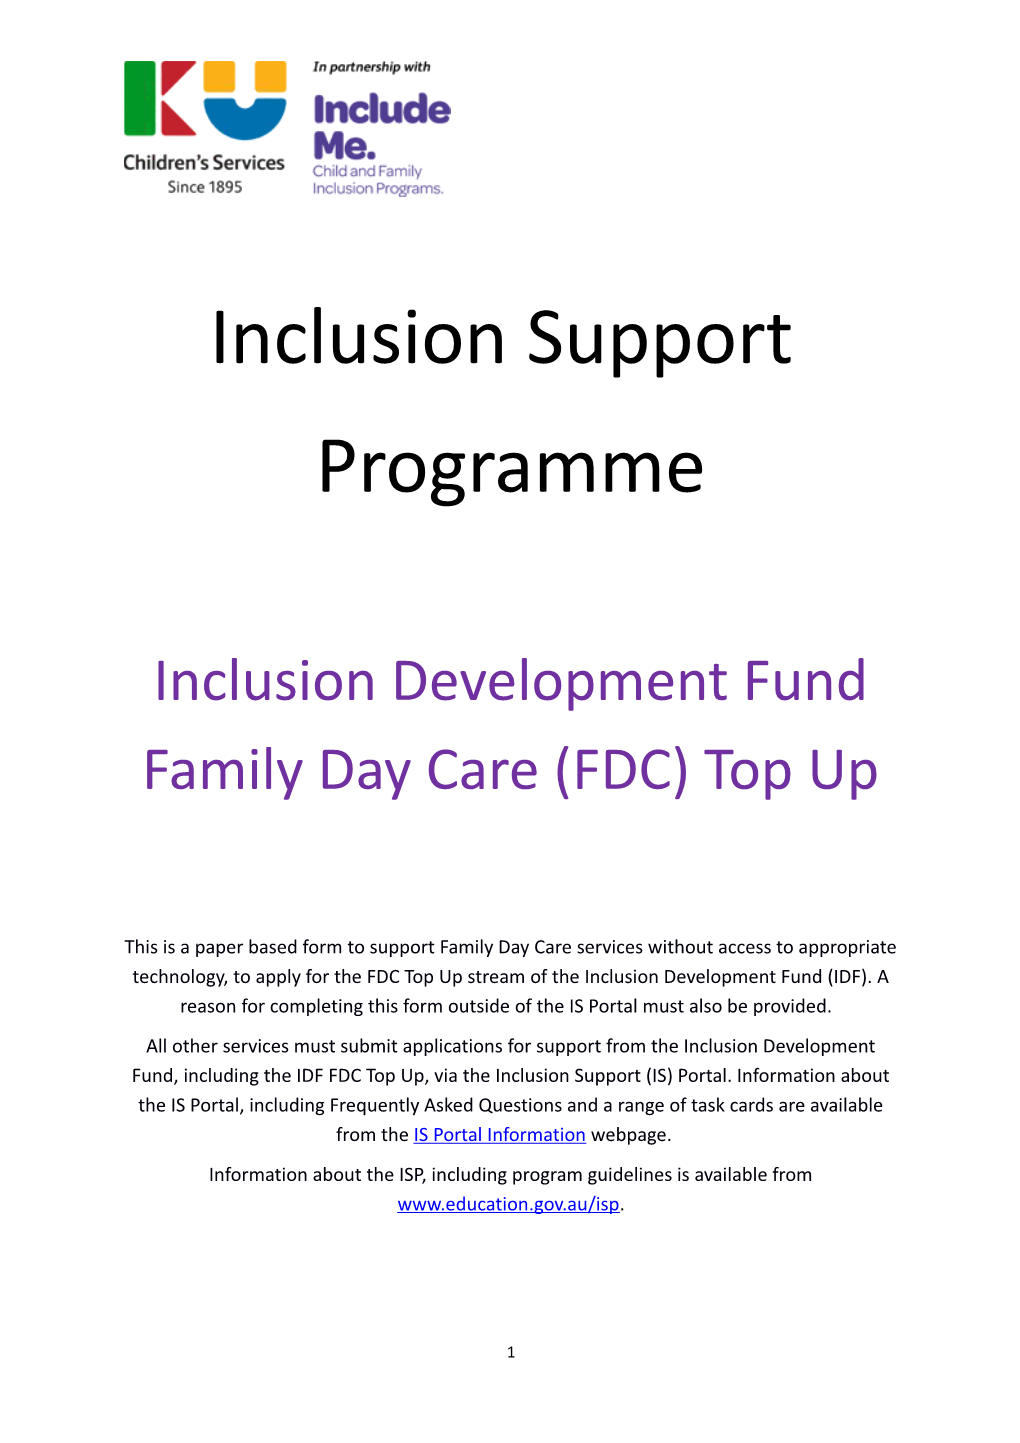 Inclusion Development Fund Family Day Care (FDC) Top Up